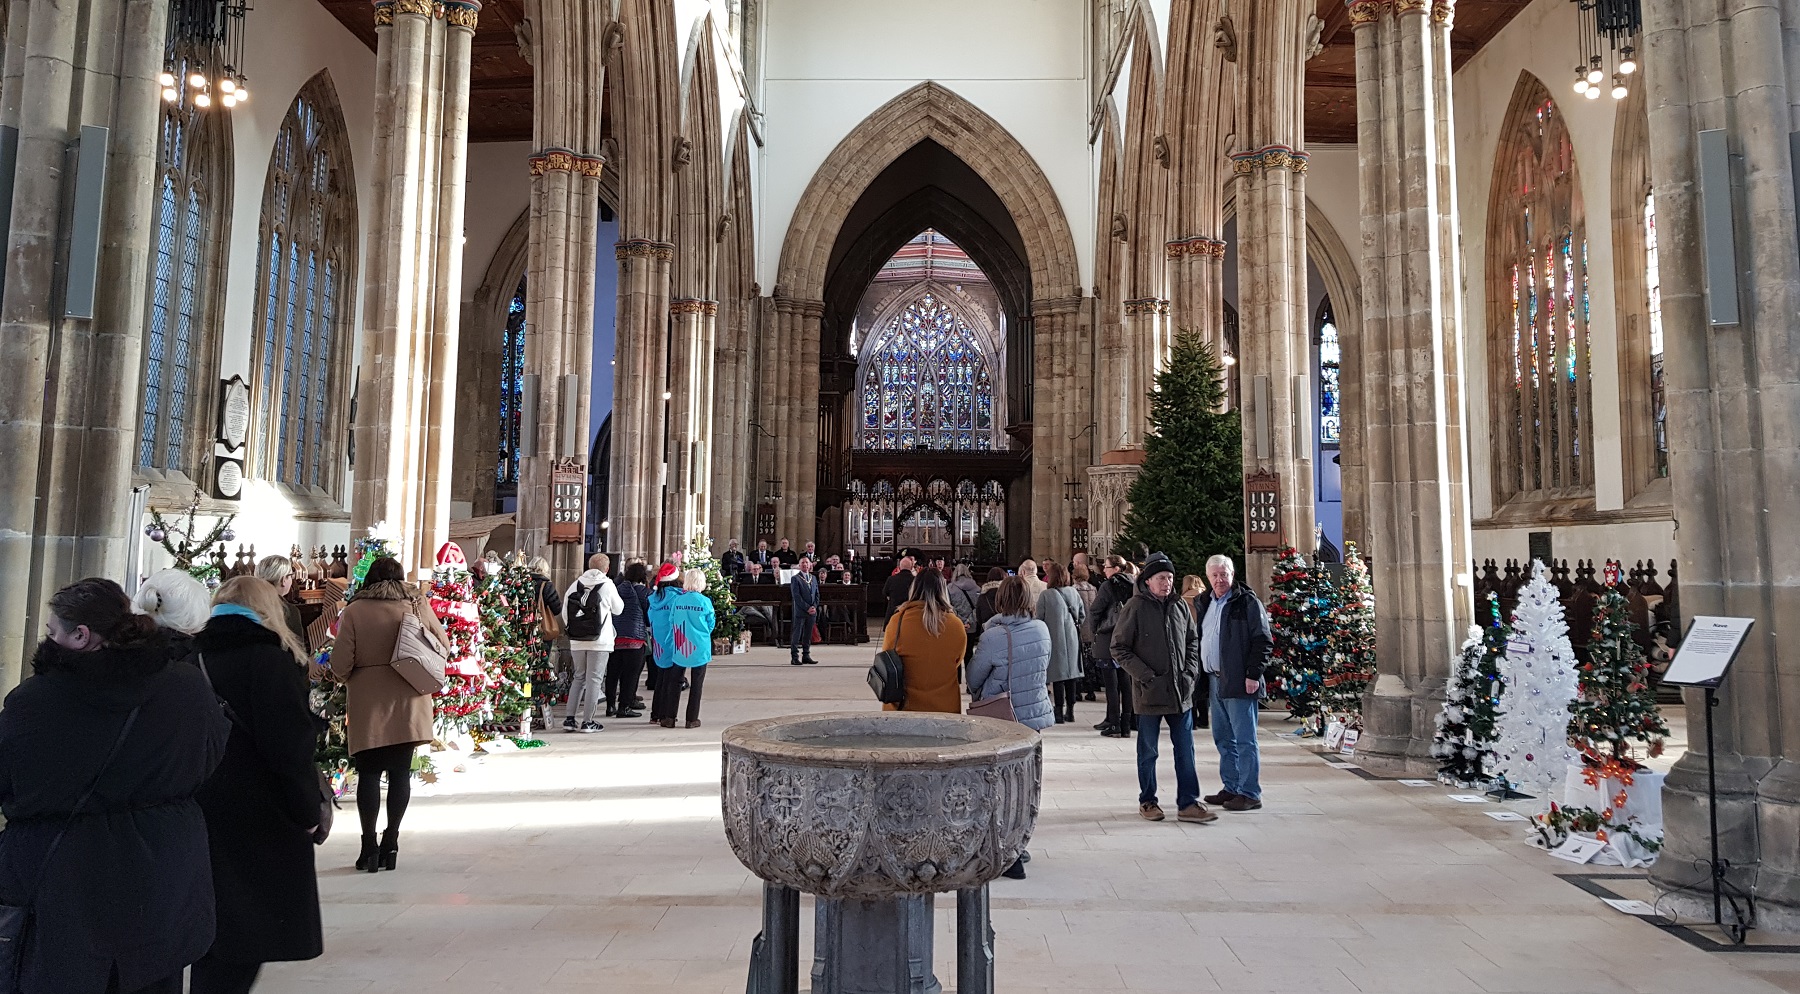 The Christmas Tree Festival at Hull Minster